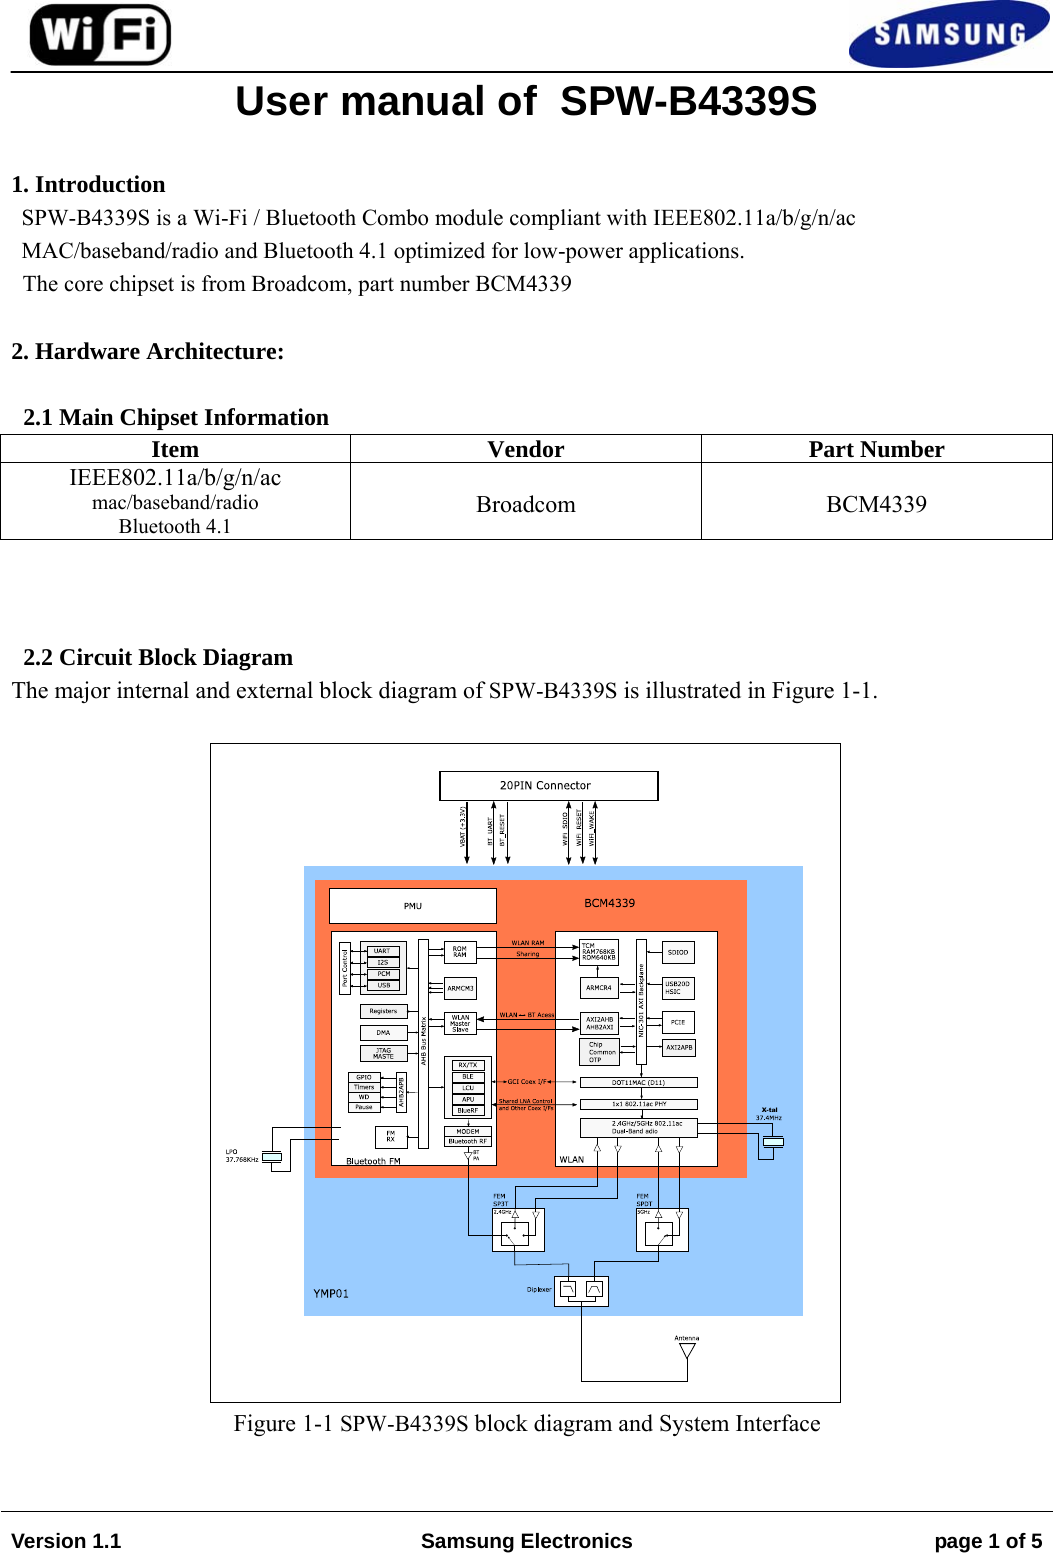 Version 1.1  Samsung Electronics  page 1 of 5User manual of  SPW-B4339S  1. IntroductionSPW-B4339S is a Wi-Fi / Bluetooth Combo module compliant with IEEE802.11a/b/g/n/ac  MAC/baseband/radio and Bluetooth 4.1 optimized for low-power applications.   The core chipset is from Broadcom, part number BCM4339 2. Hardware Architecture:2.1 Main Chipset Information Item Vendor Part NumberIEEE802.11a/b/g/n/ac mac/baseband/radio Bluetooth 4.1 Broadcom  BCM4339 2.2 Circuit Block Diagram The major internal and external block diagram of SPW-B4339S is illustrated in Figure 1-1. Figure 1-1 SPW-B4339S block diagram and System Interface X-tal